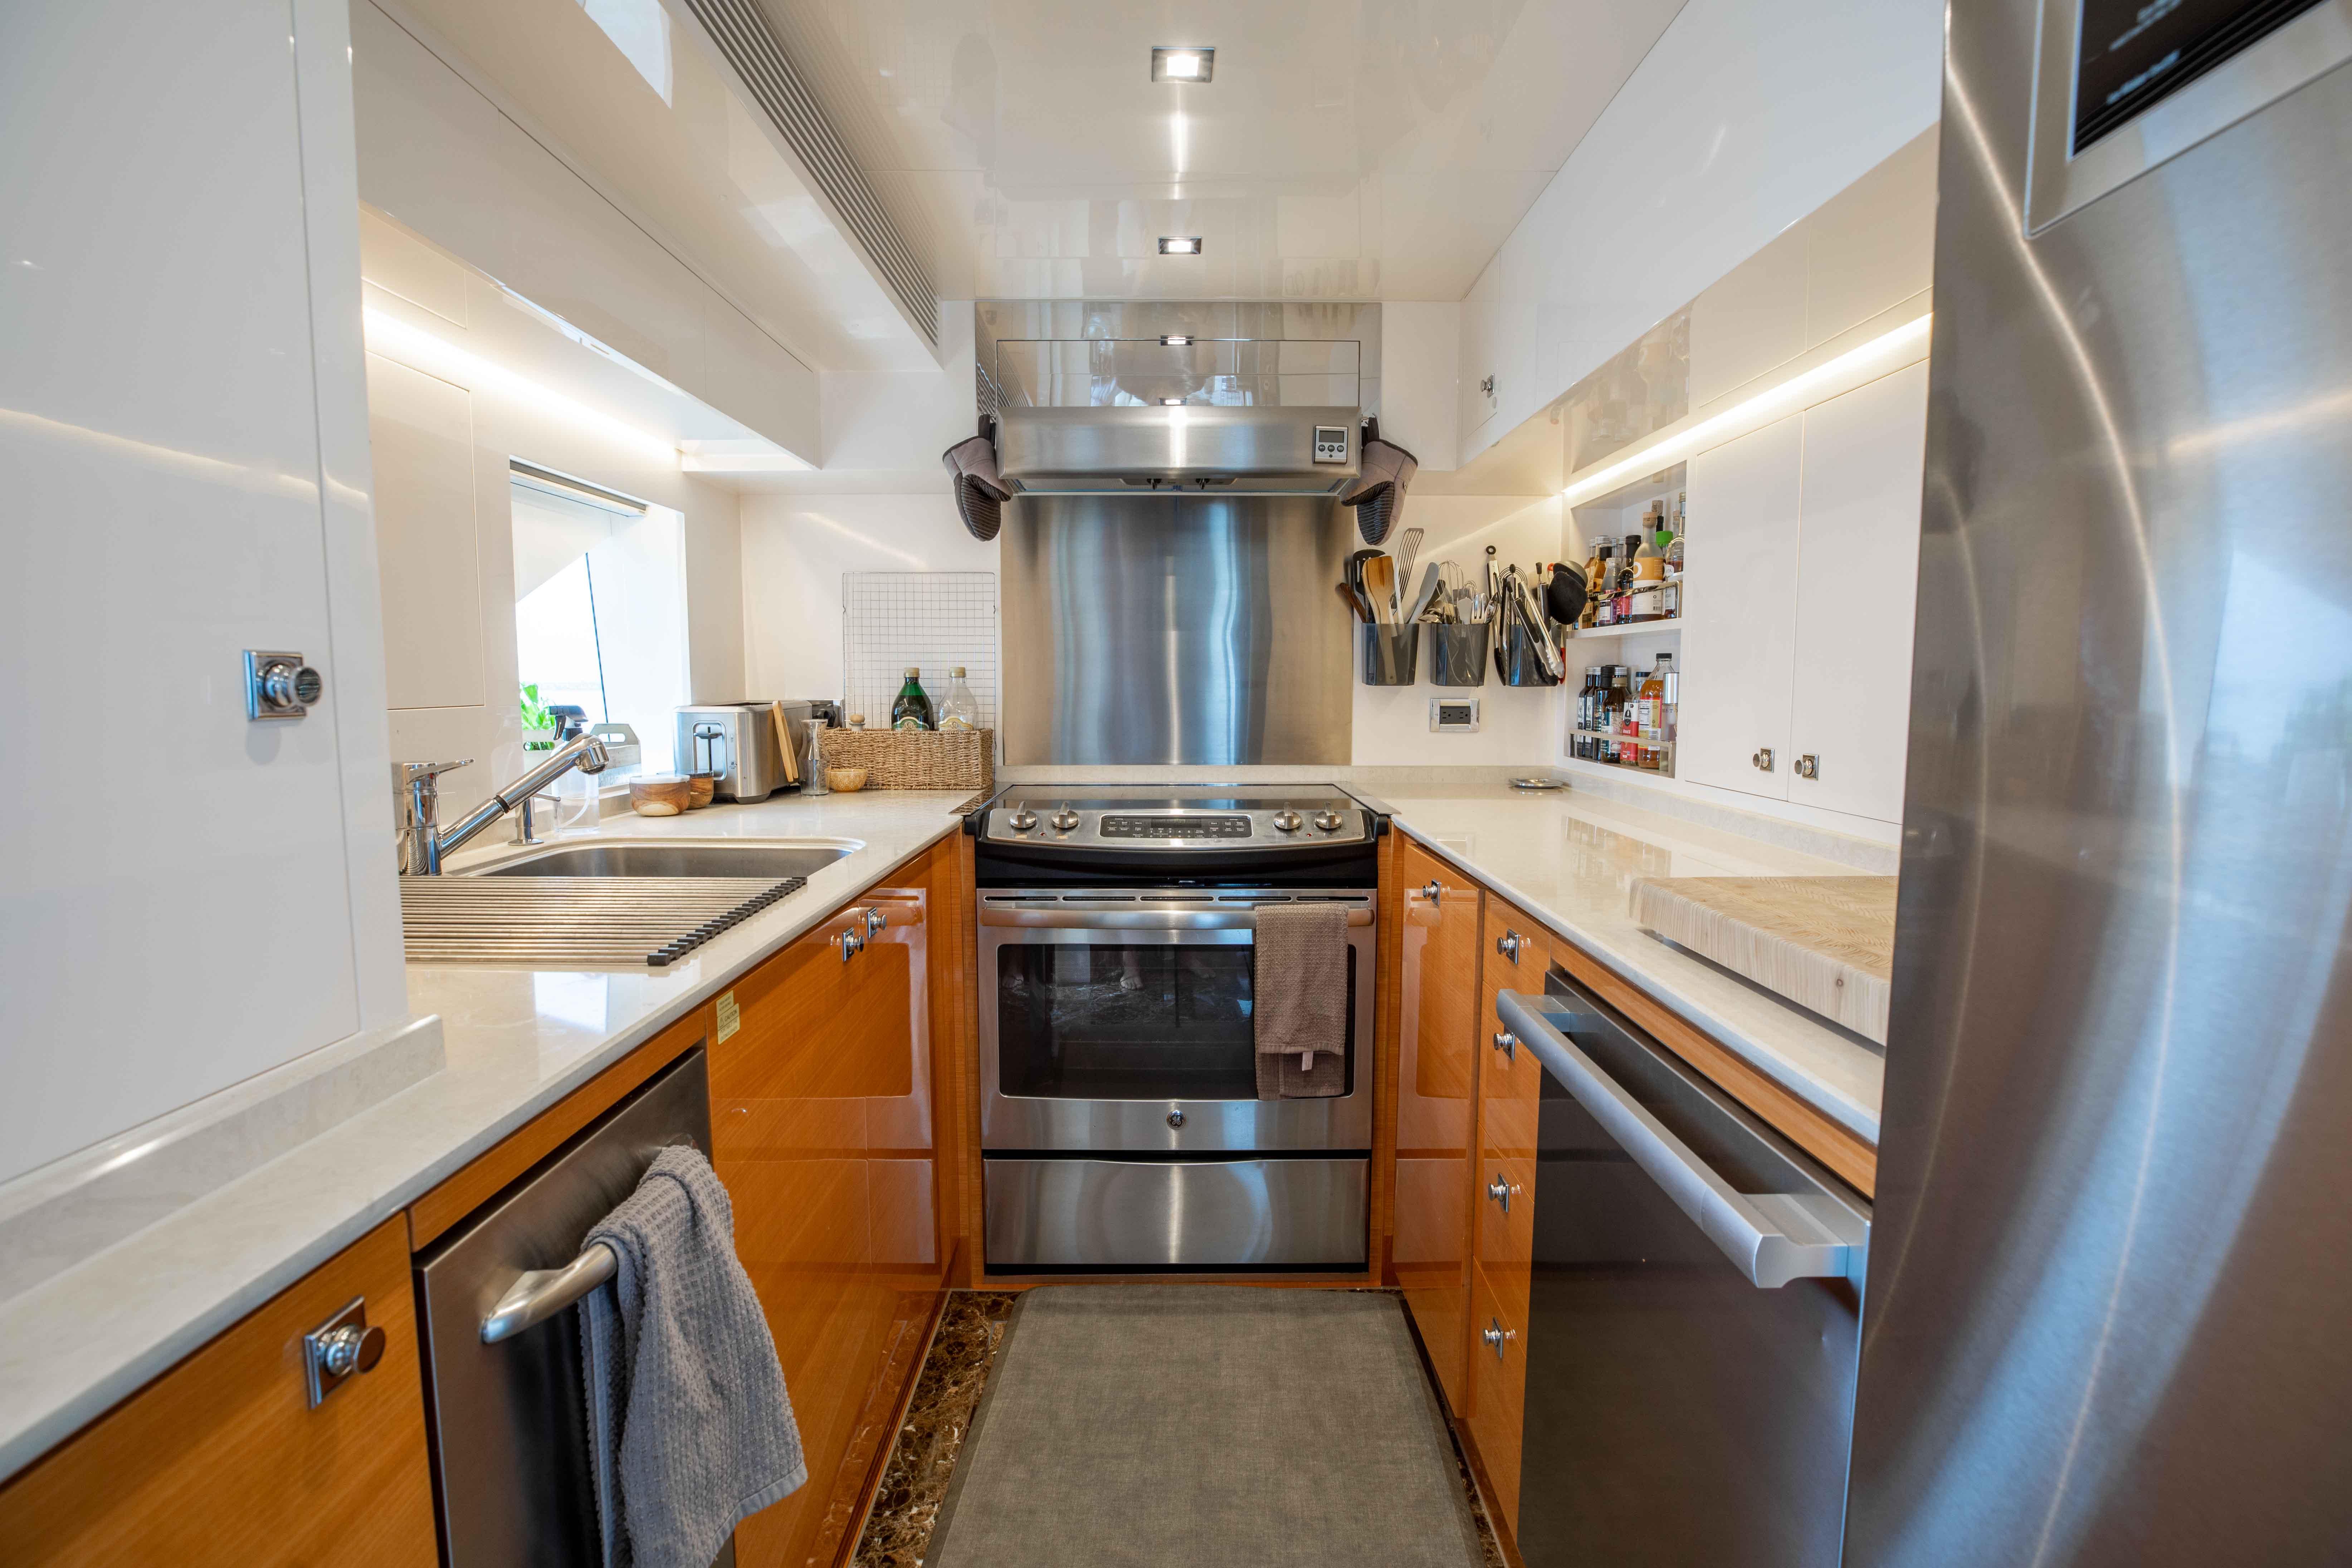 Galley and Stainless Steel Appliances